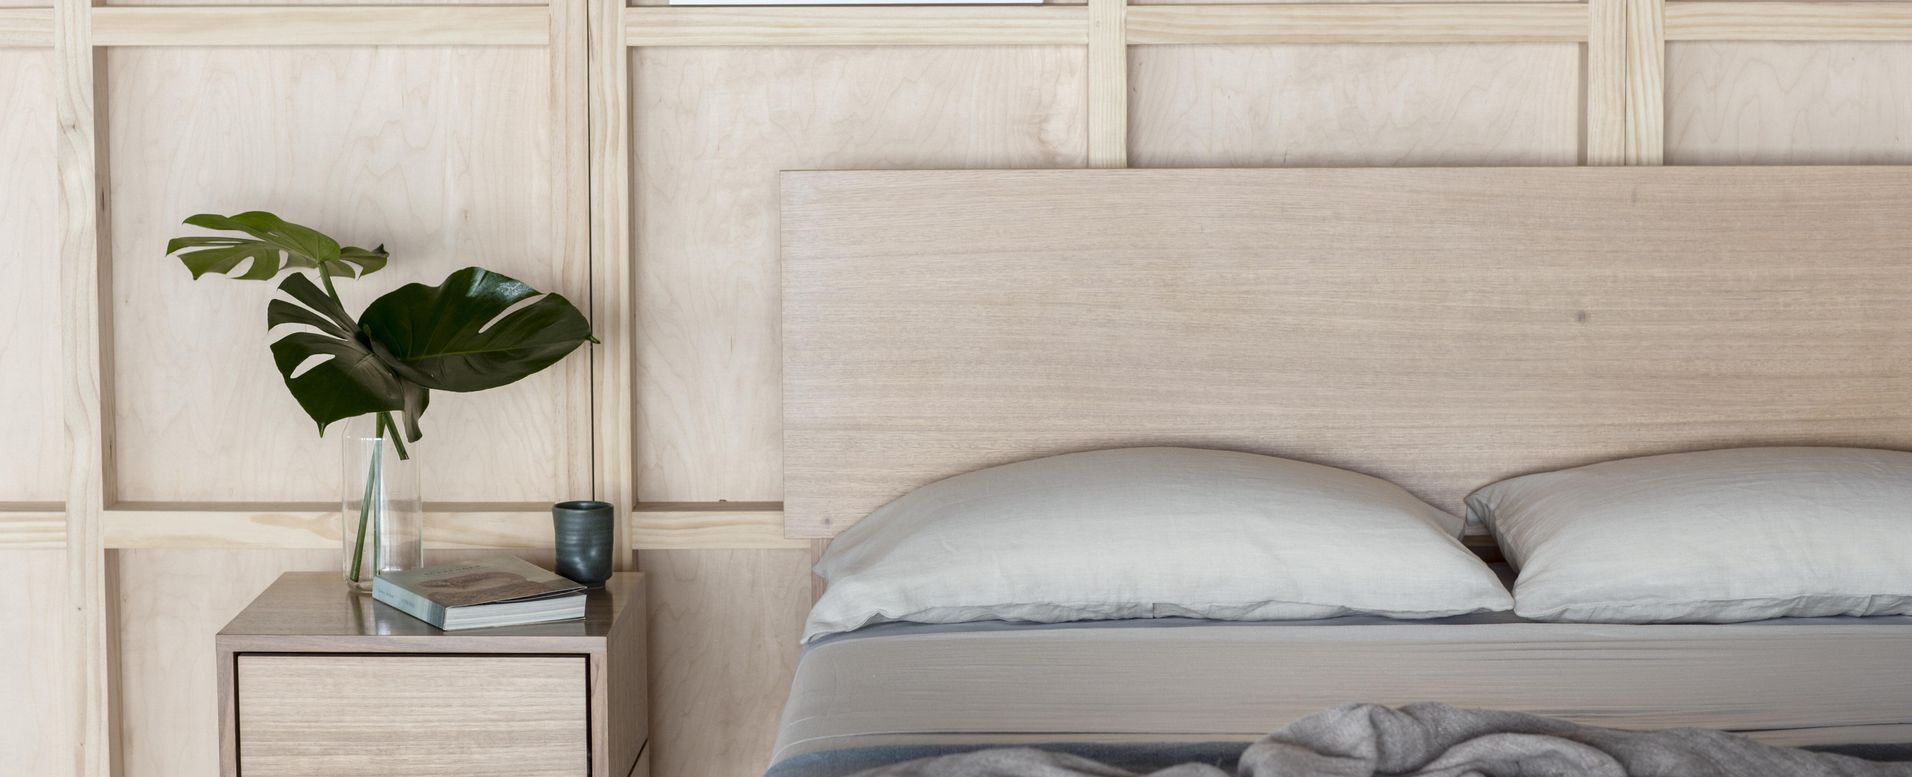 The Natural Bedding Company Banner image